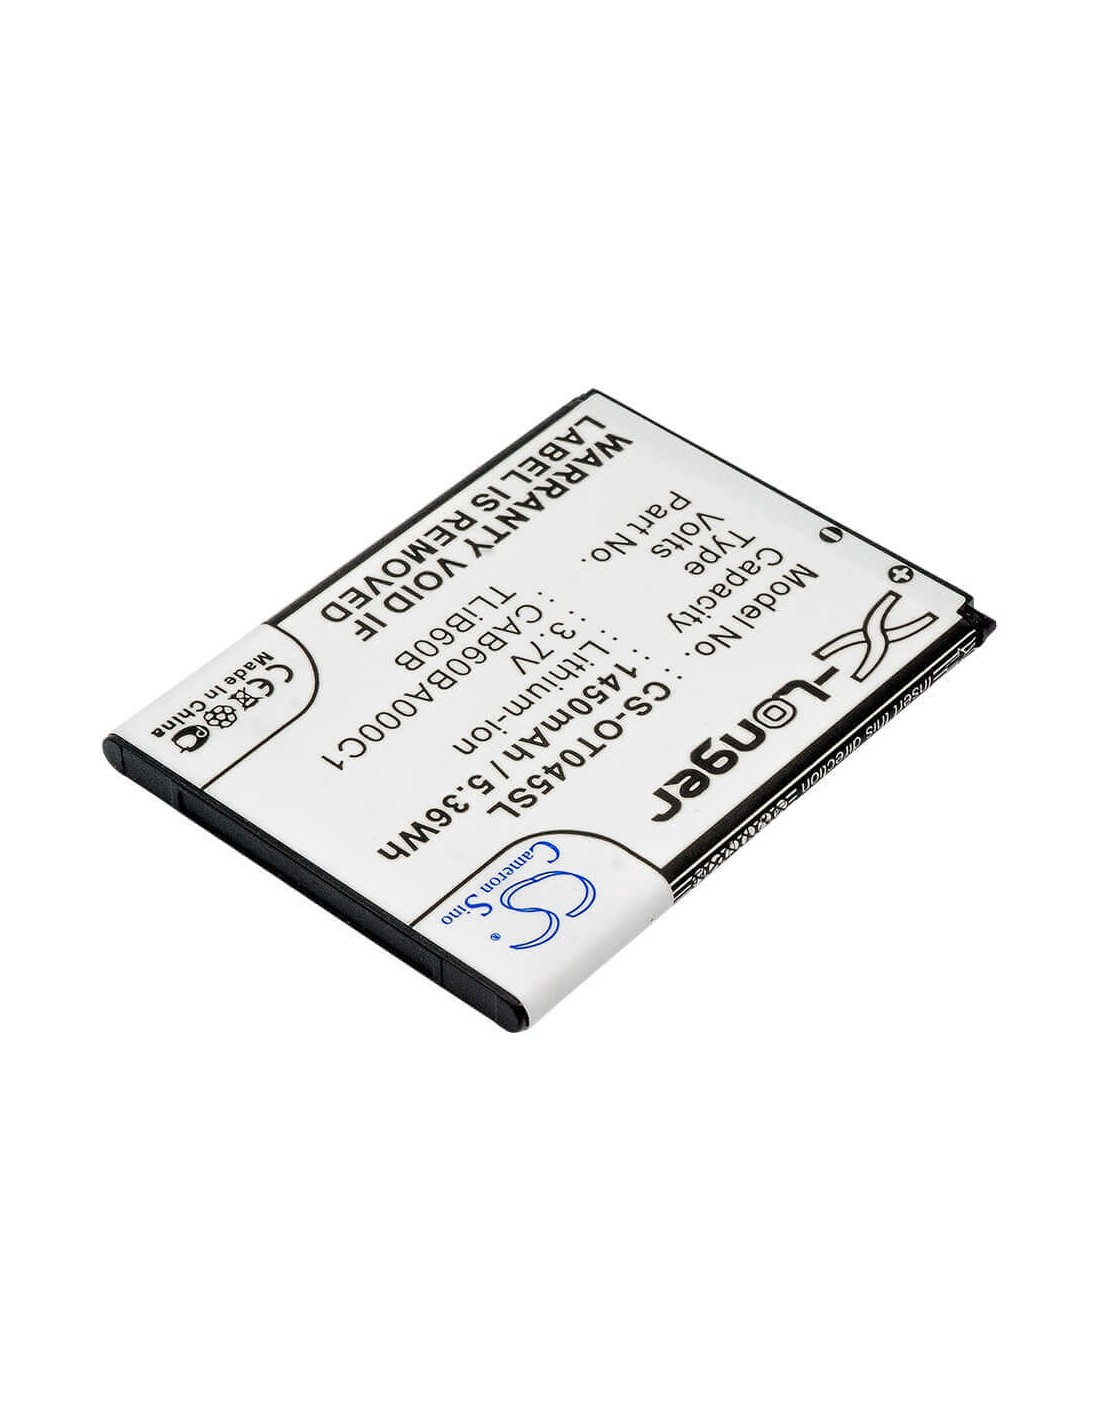 Battery for Alcatel One Touch Shockwave, ADR3045 3.7V, 1450mAh - 5.37Wh